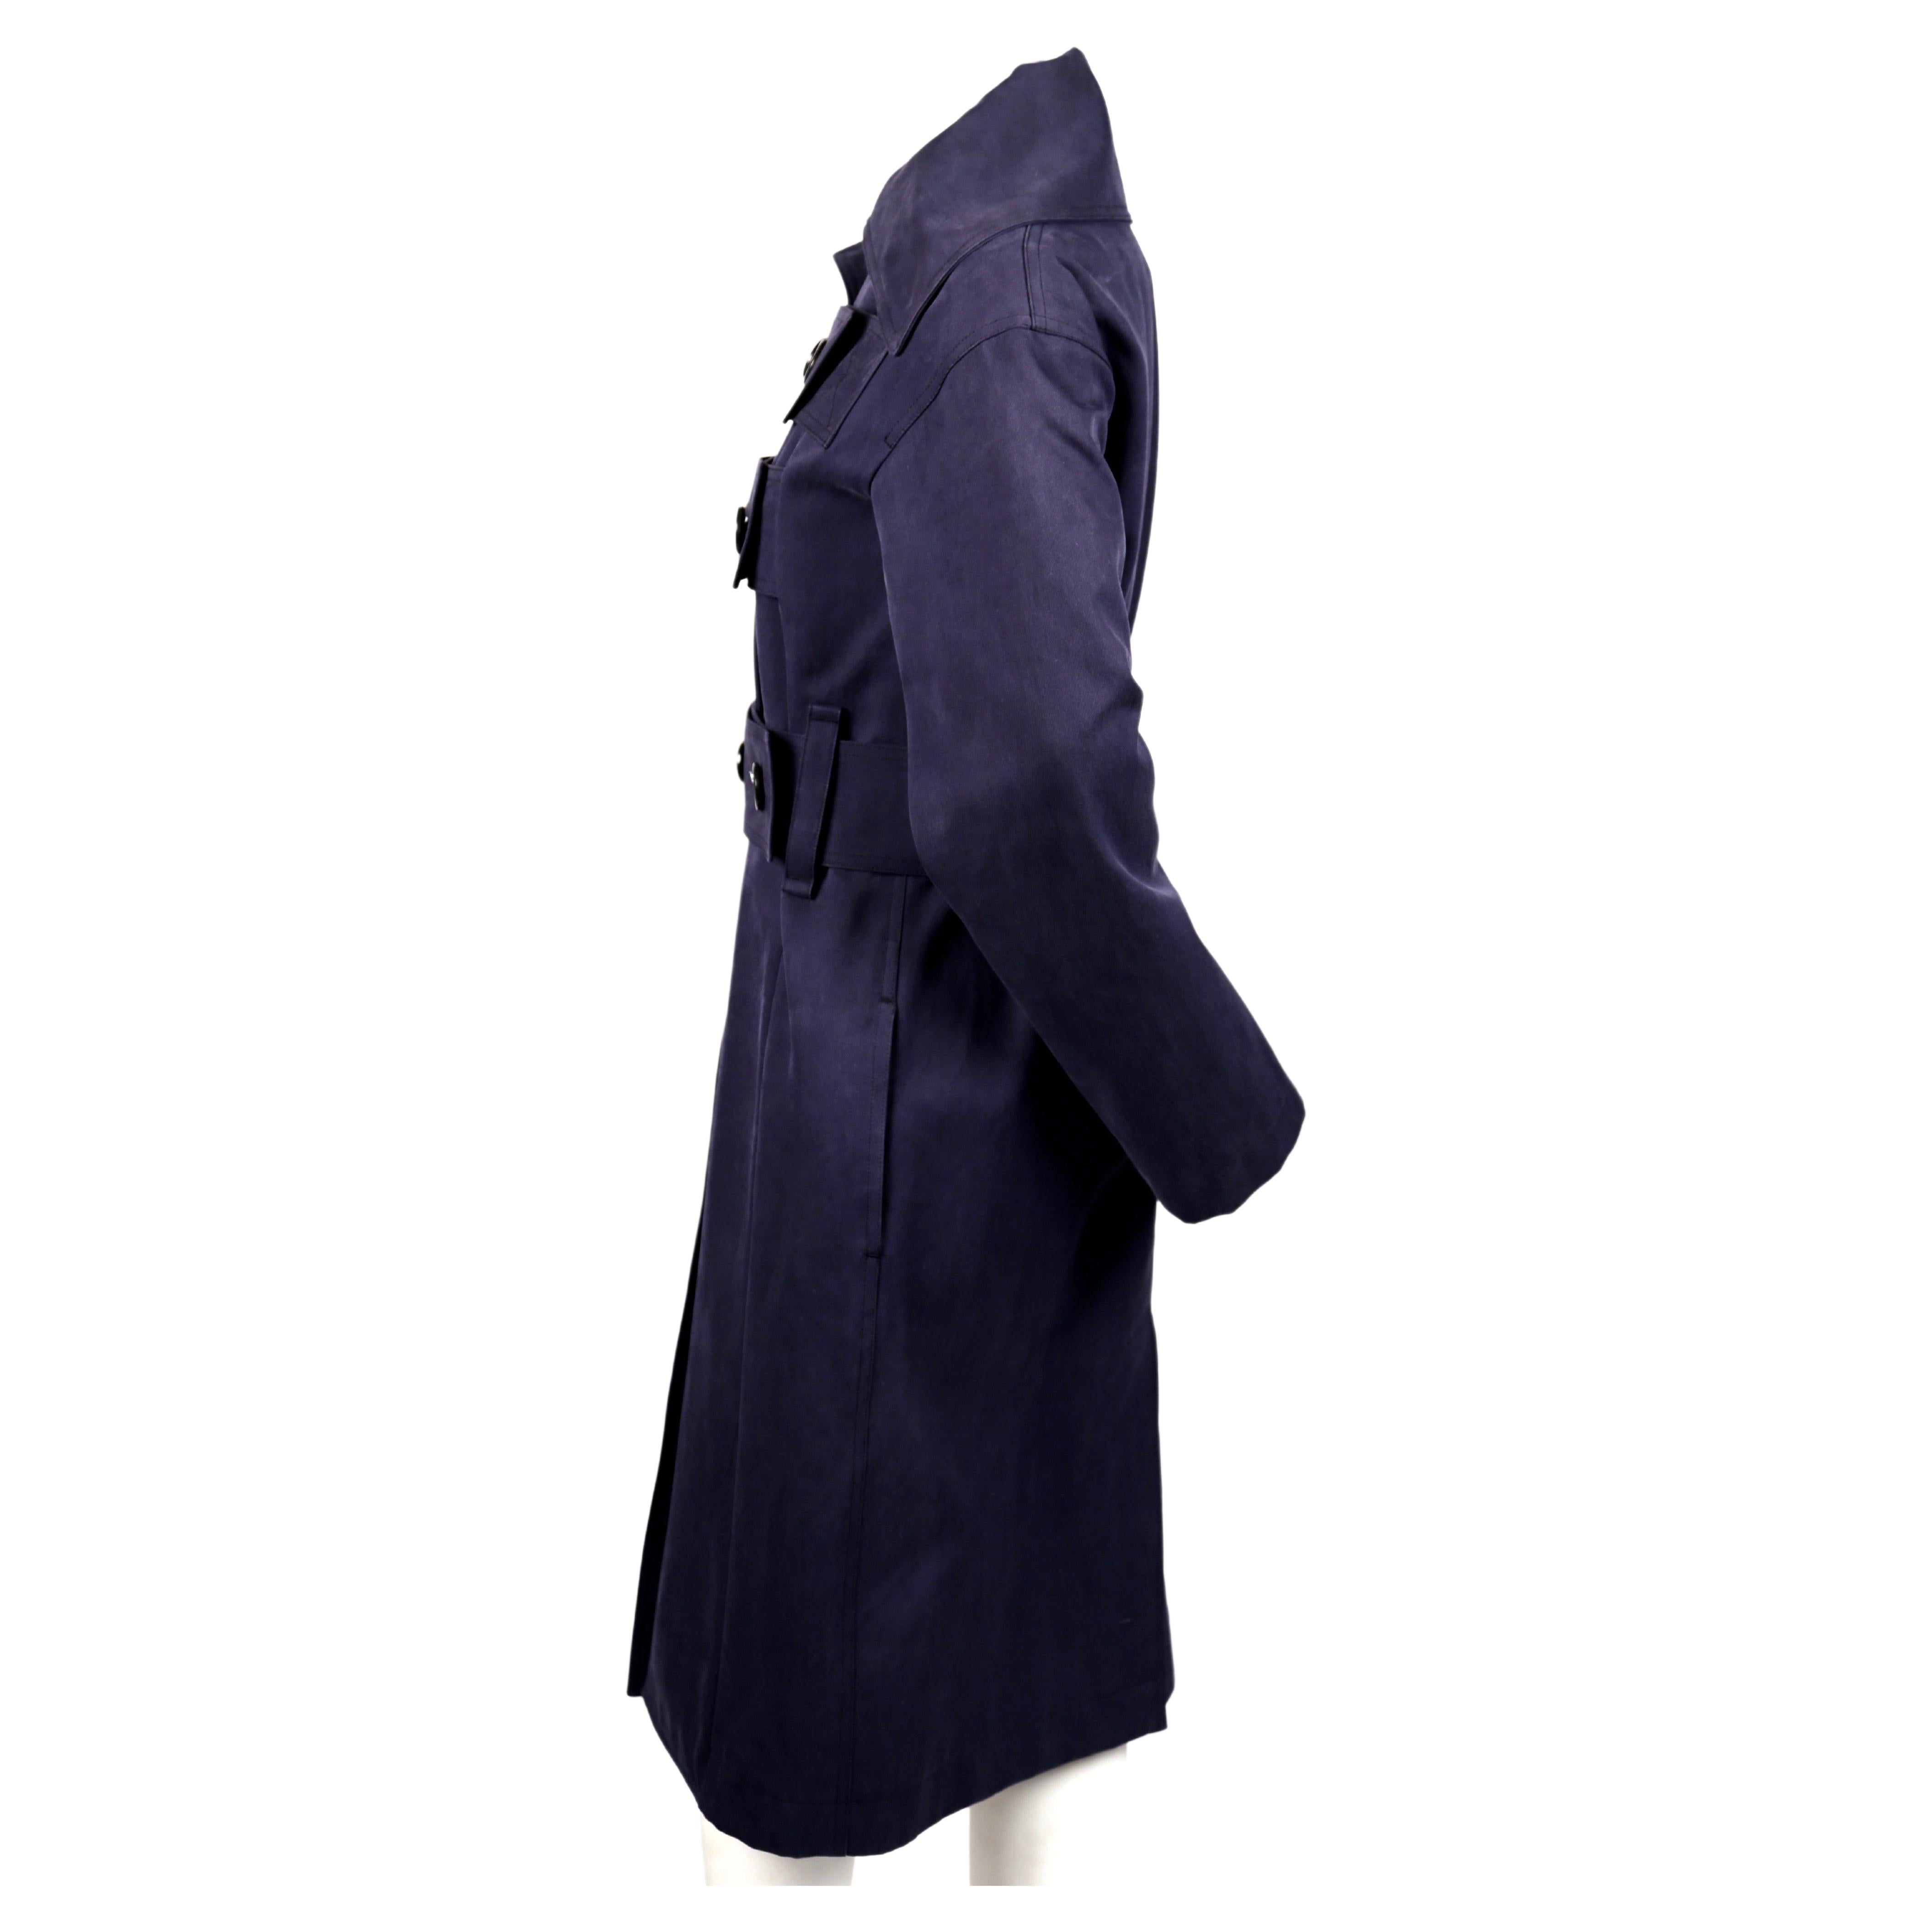 Women's CELINE by PHOEBE PHILO navy blue brushed cotton trench coat For Sale